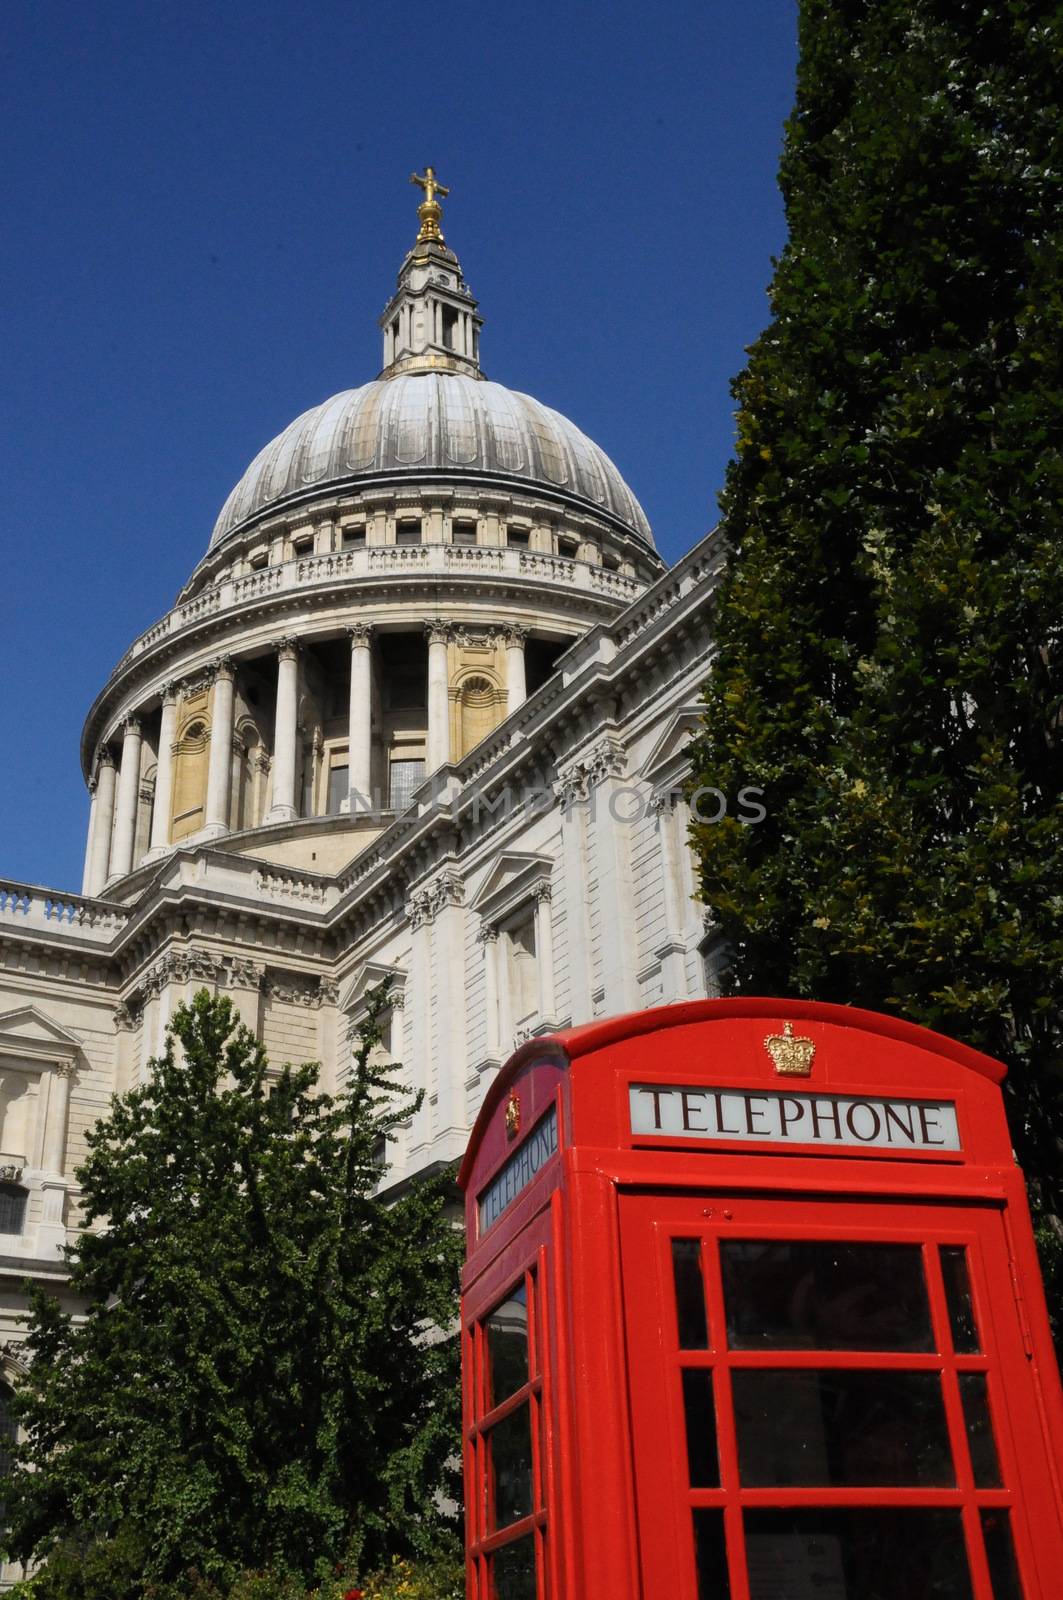 Red telephone box with St Pauls cathedral dome in the background